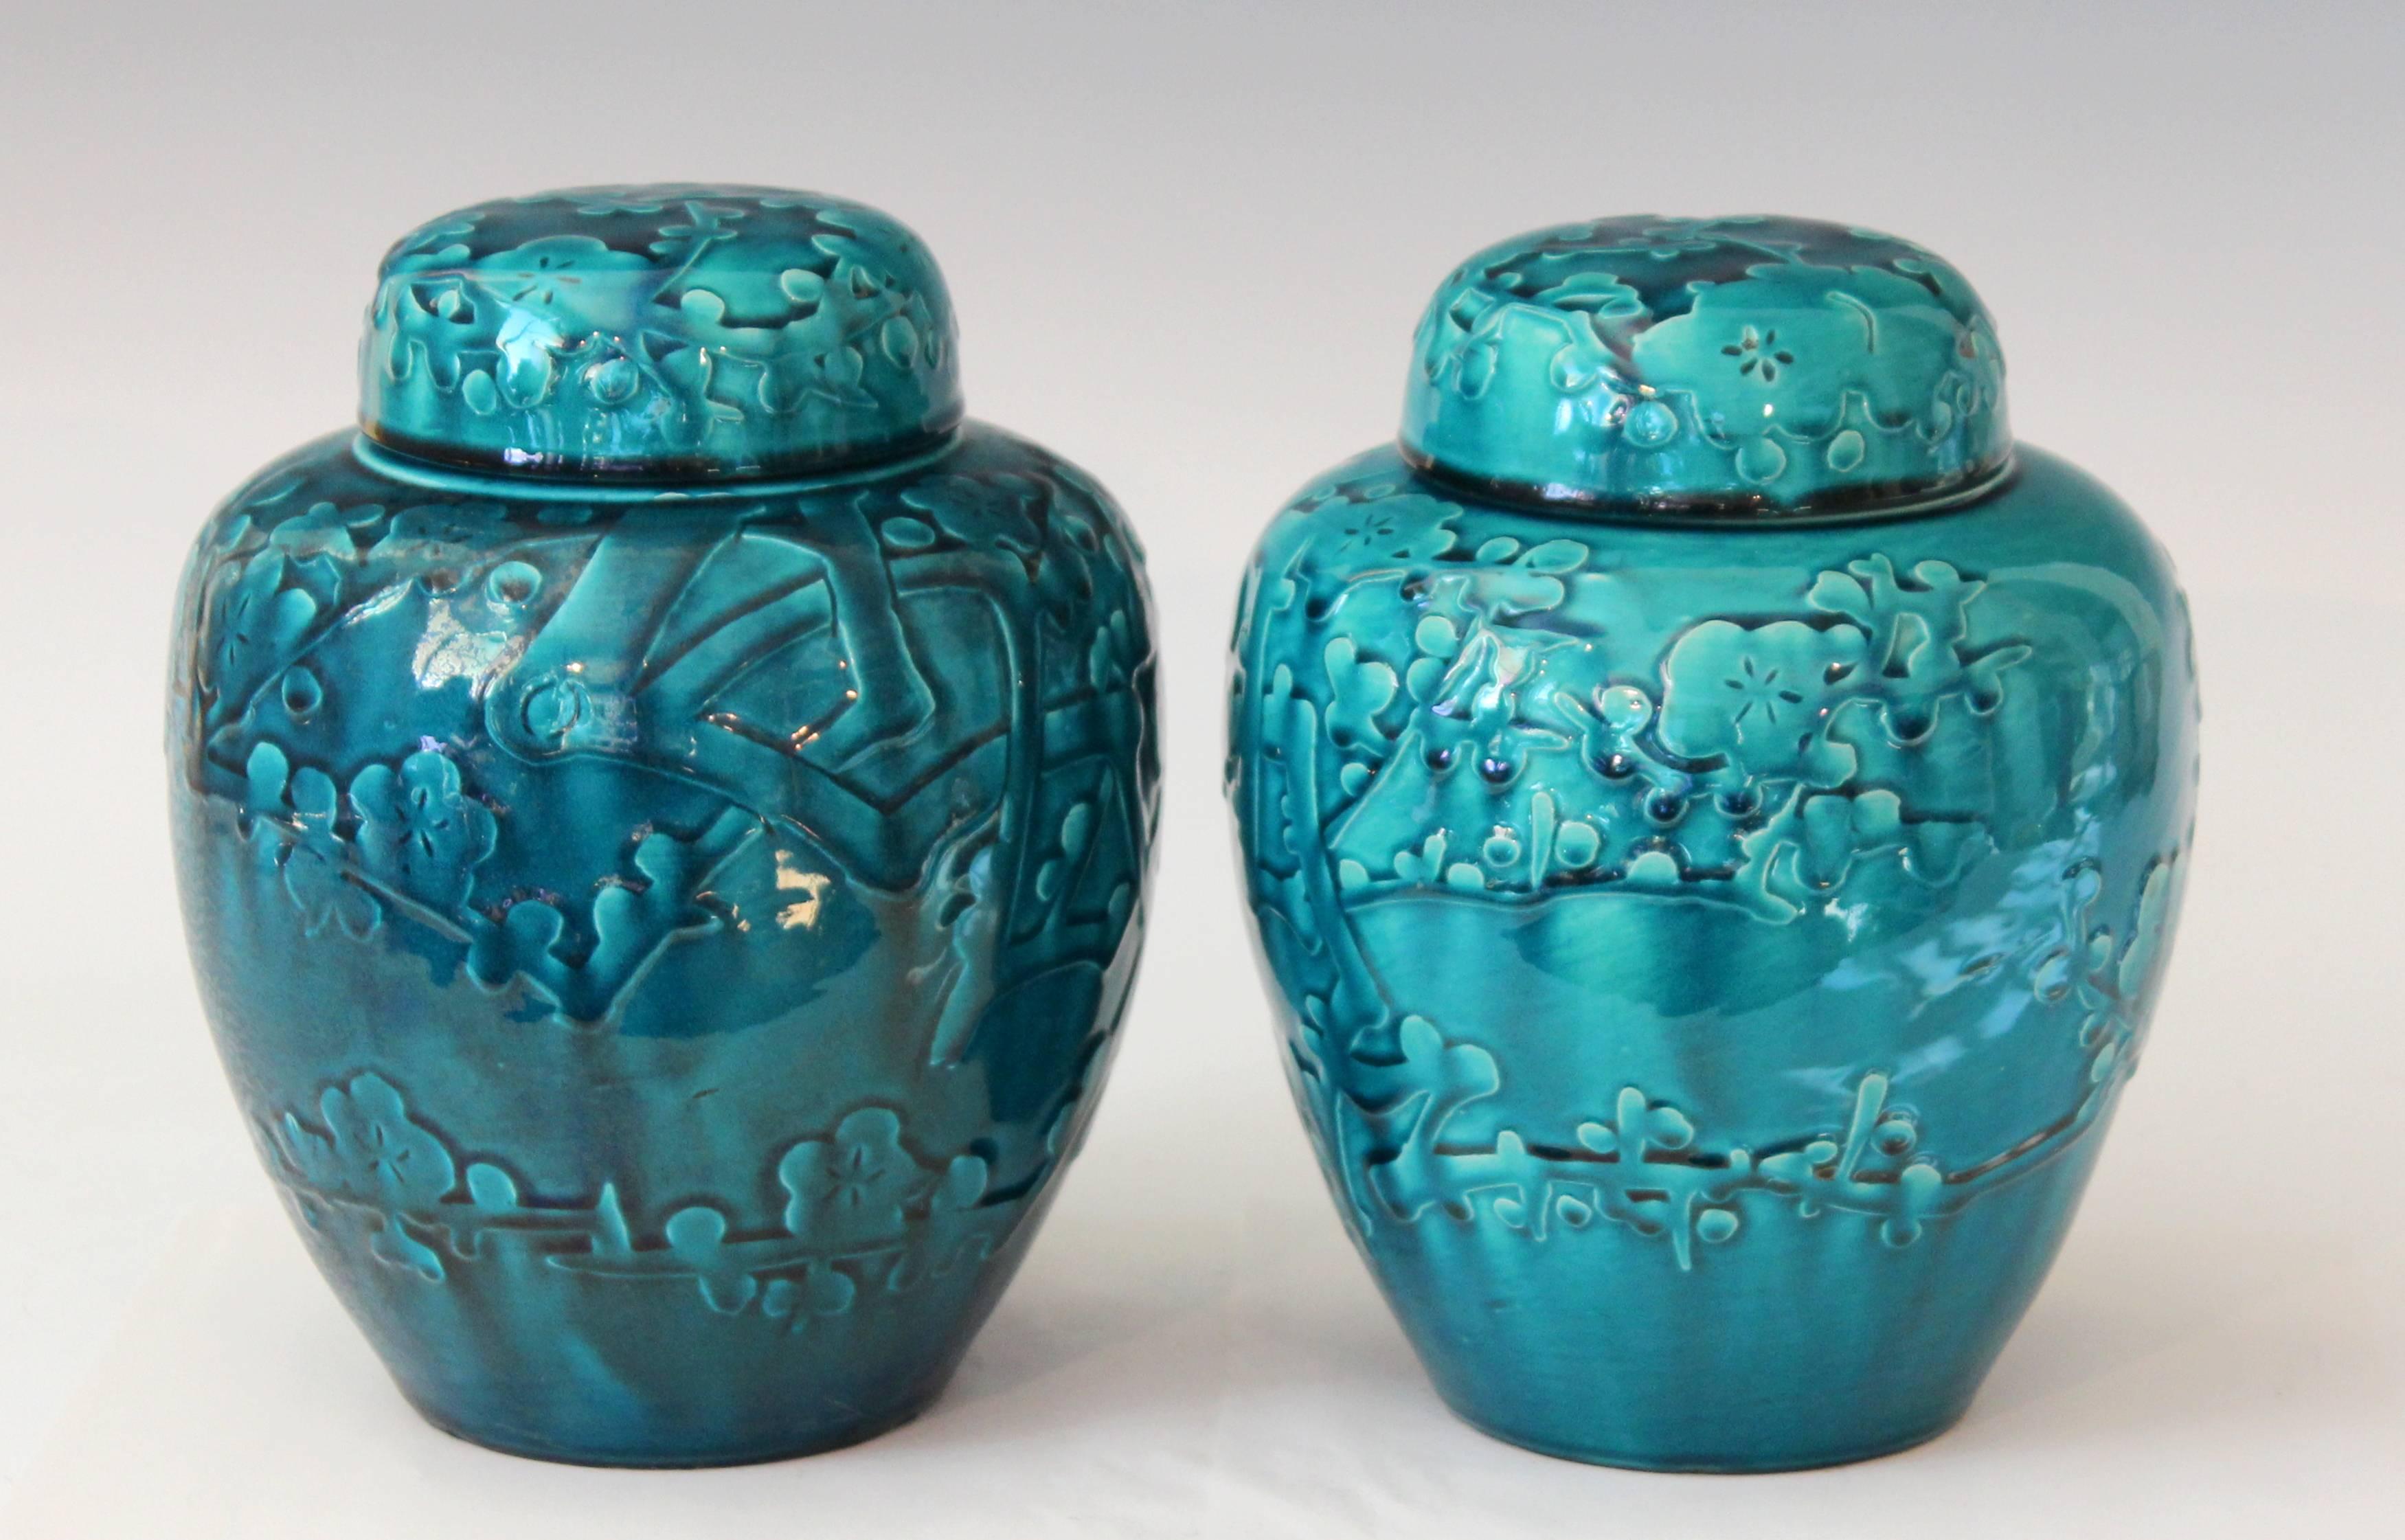 Pair of Awaji ginger jars and covers decorated with applied and incised prunus blossoms highlighted with a deep turquoise monochrome glaze, circa 1930. Impressed marks. Measures: 9